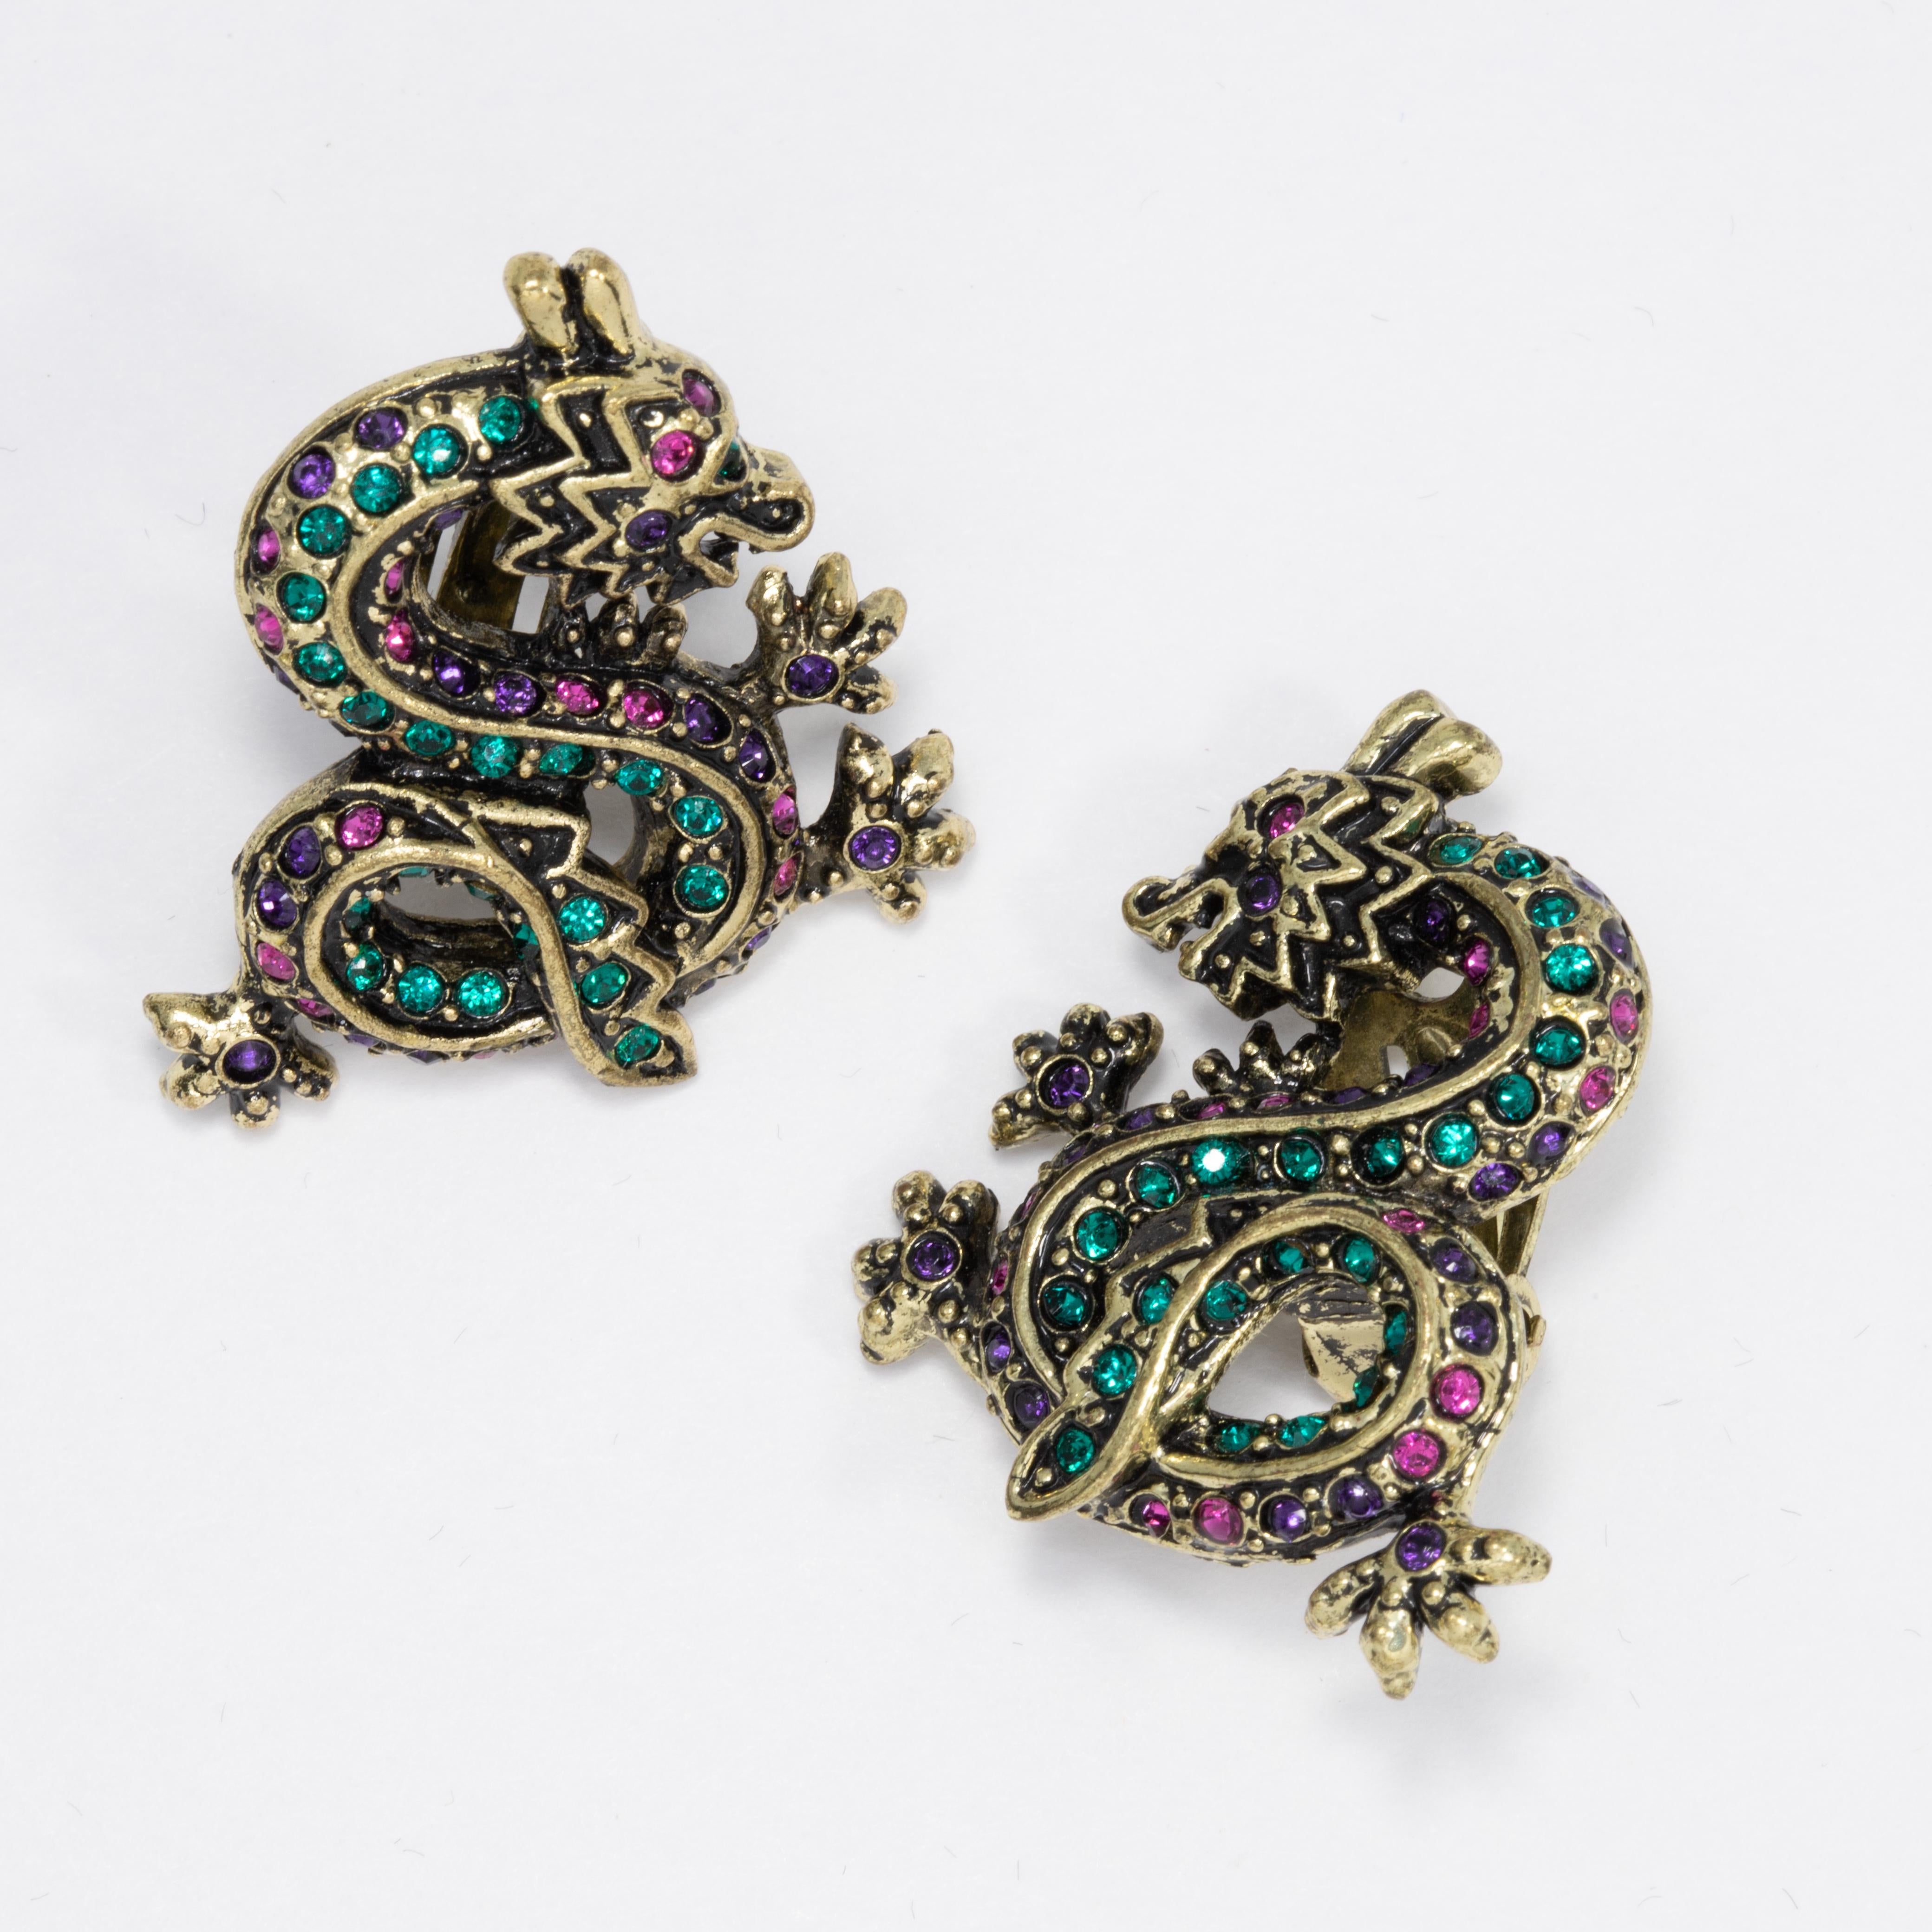 Crystal encrusted dragon clip on earrings from Heidi Daus. Each dragon features emerald, amethyst, and sapphire crystals set on antique brass-tone metal. 

Limited-time retired edition.

Hallmarks: Heidi Daus, CN